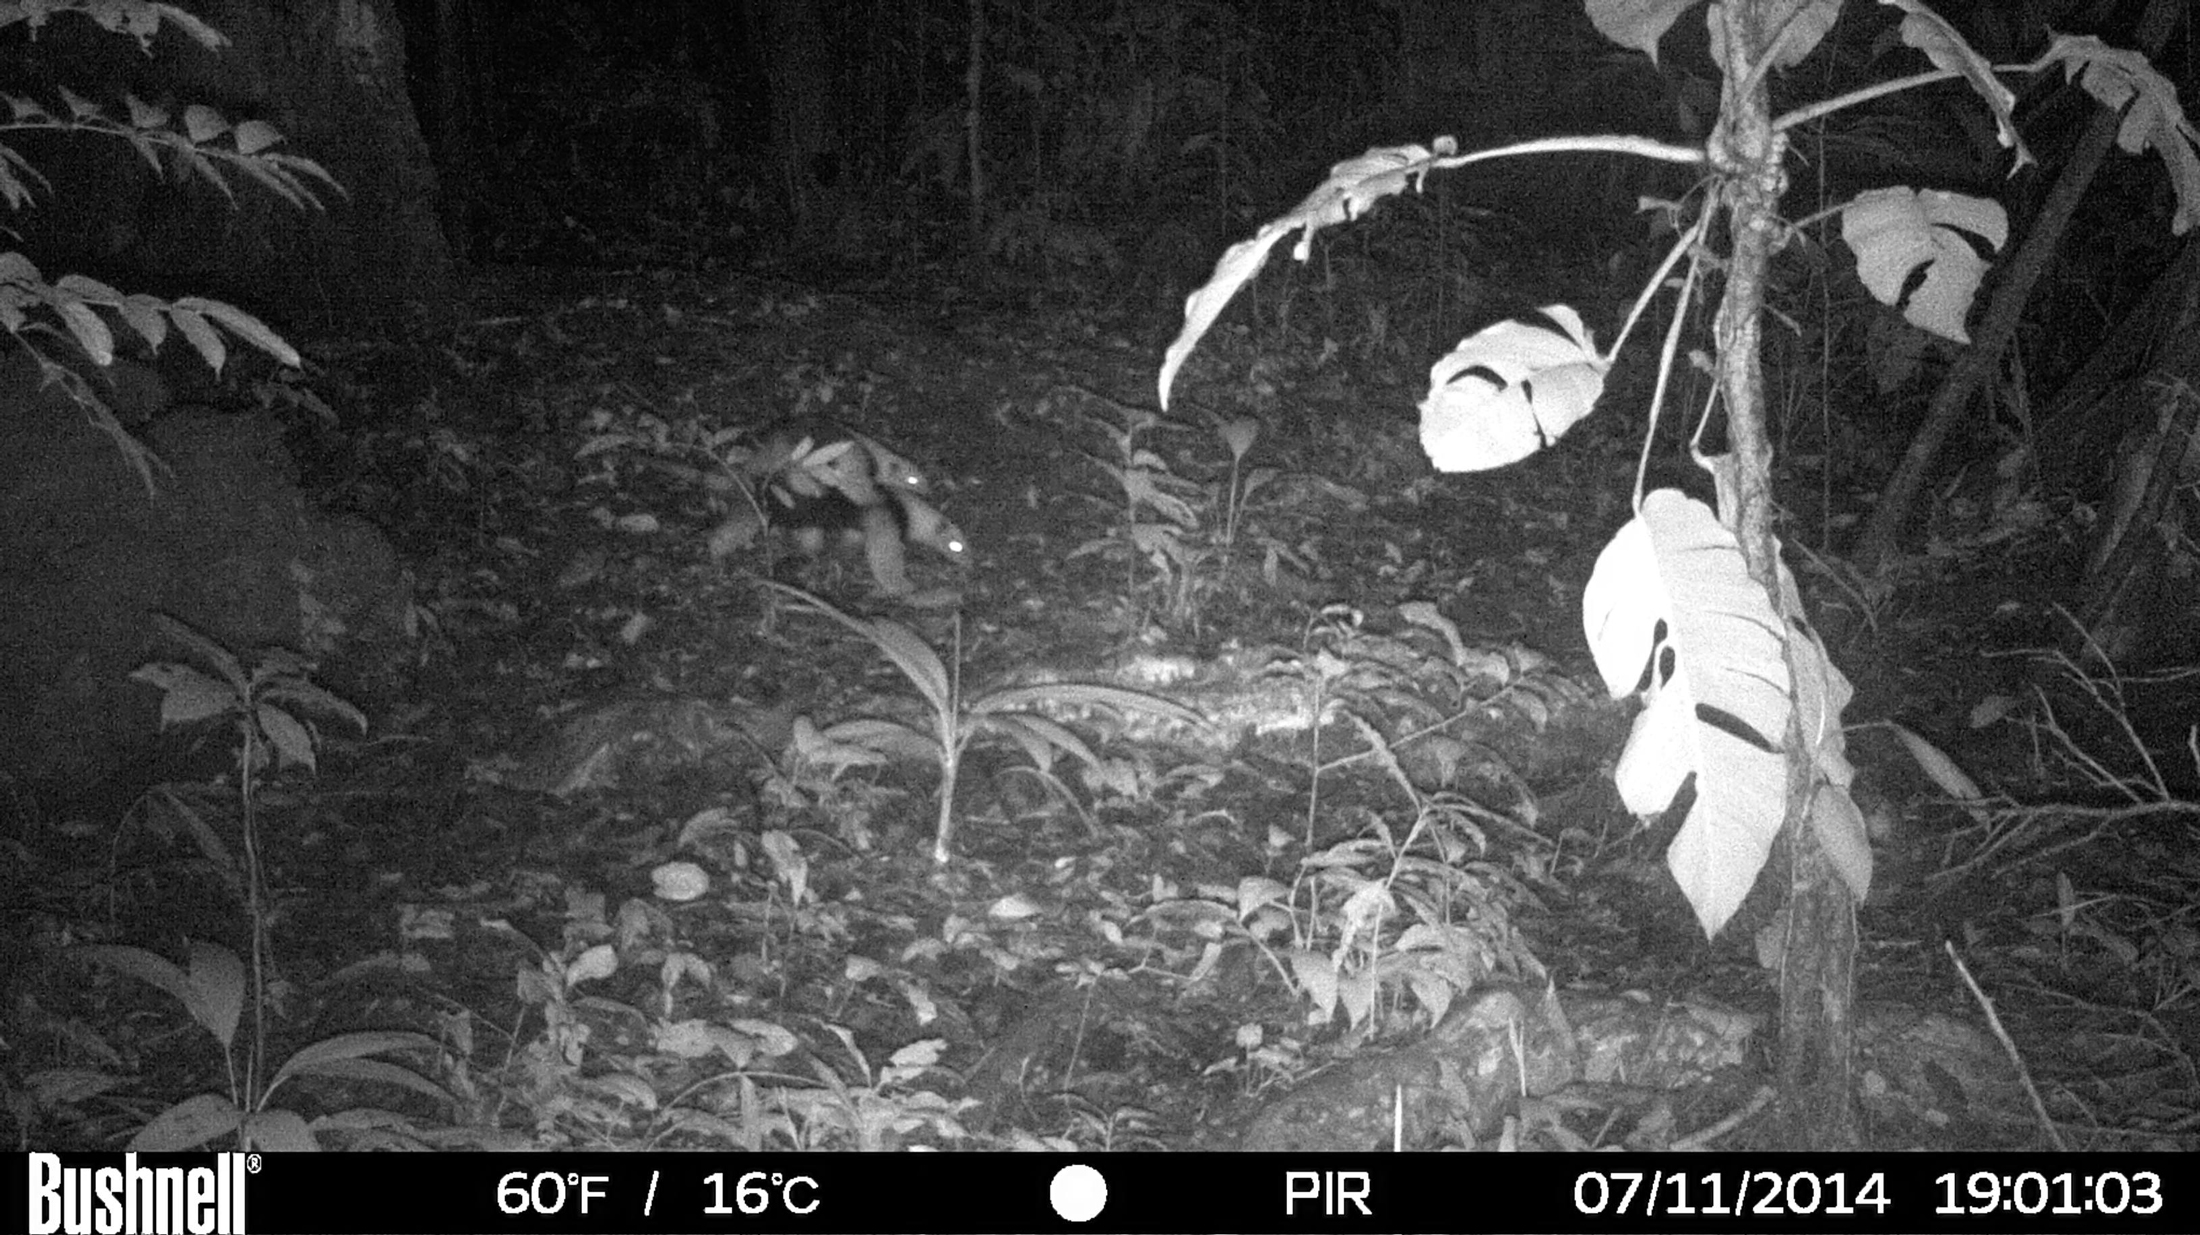 The project used camera traps to track wildlife on PES lands. They captured this image of a mother tamandua carrying her baby. Photo courtesy of Margot Wood